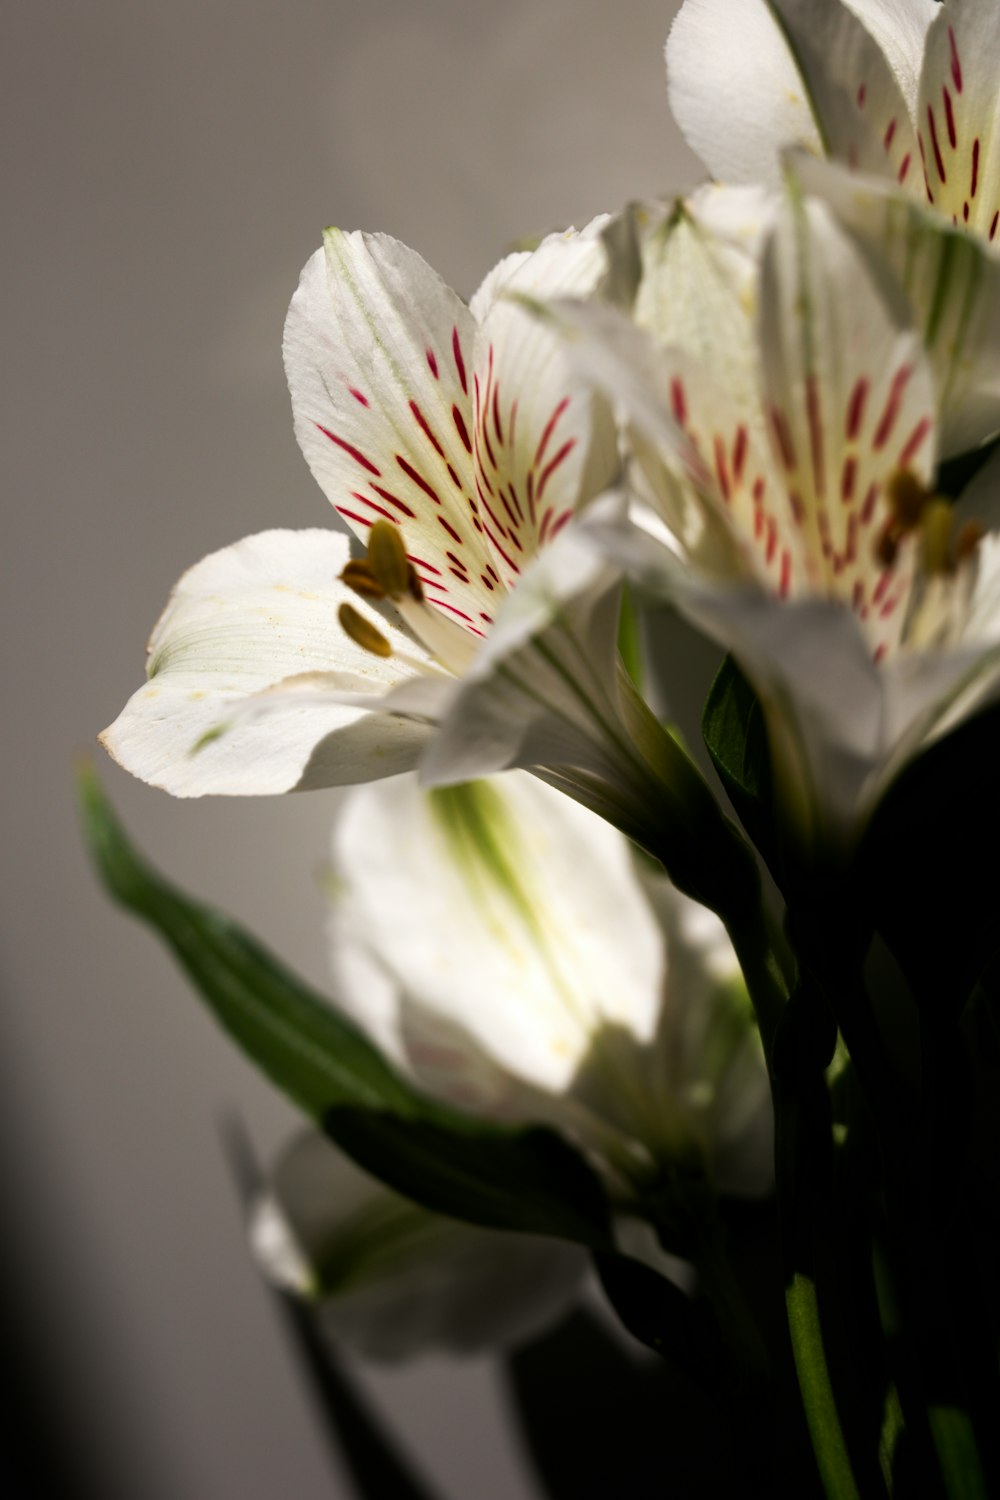 a close up of some white flowers in a vase